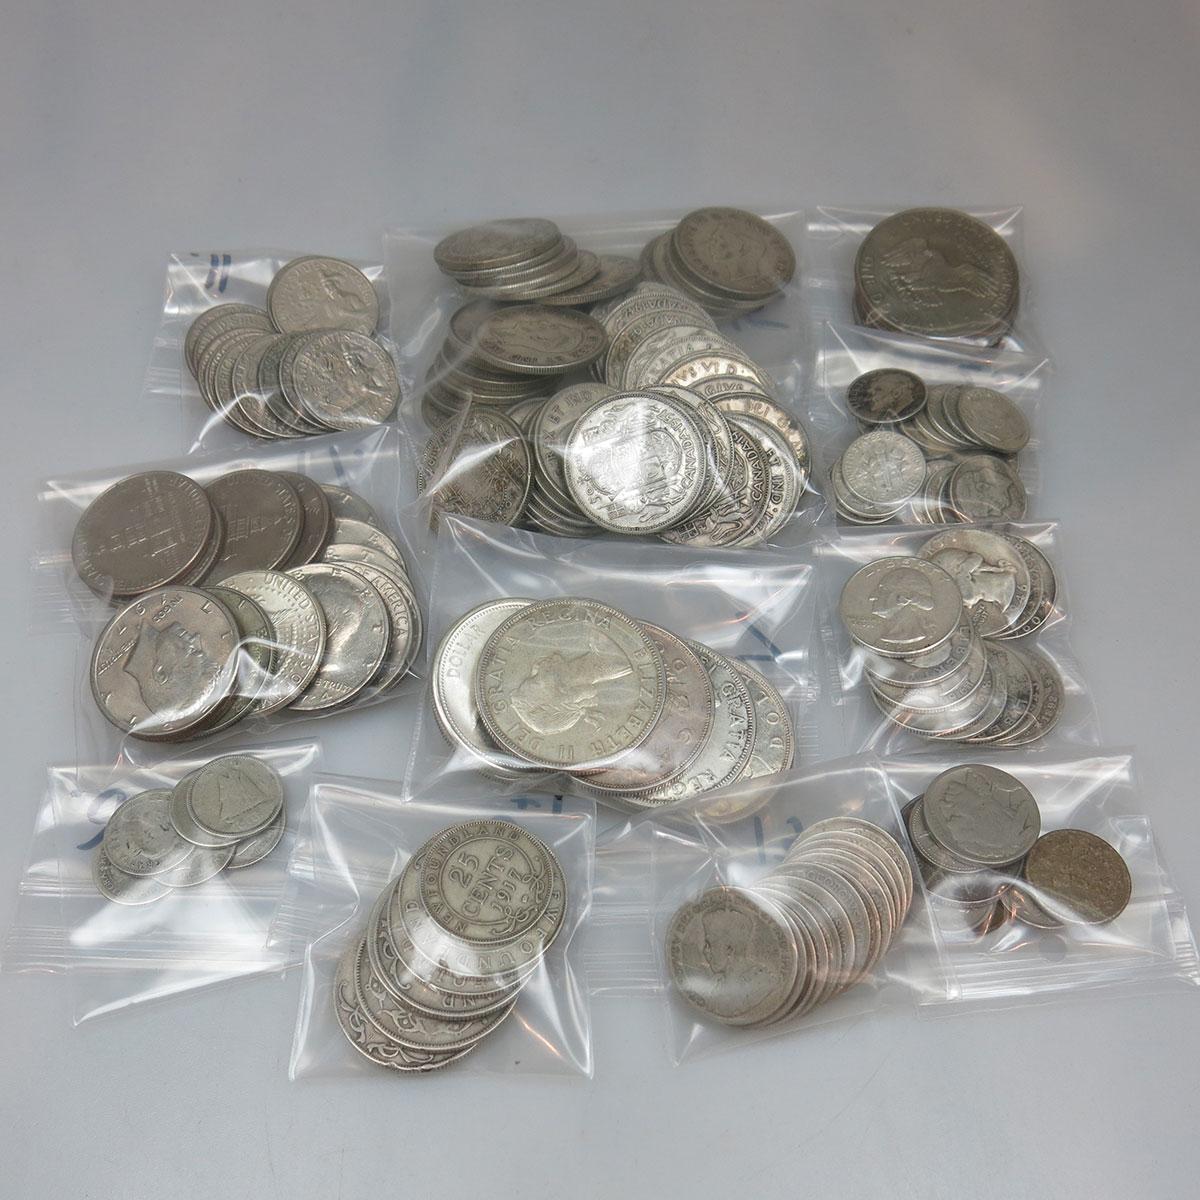 Small Quantity Of Canadian And Foreign Coins